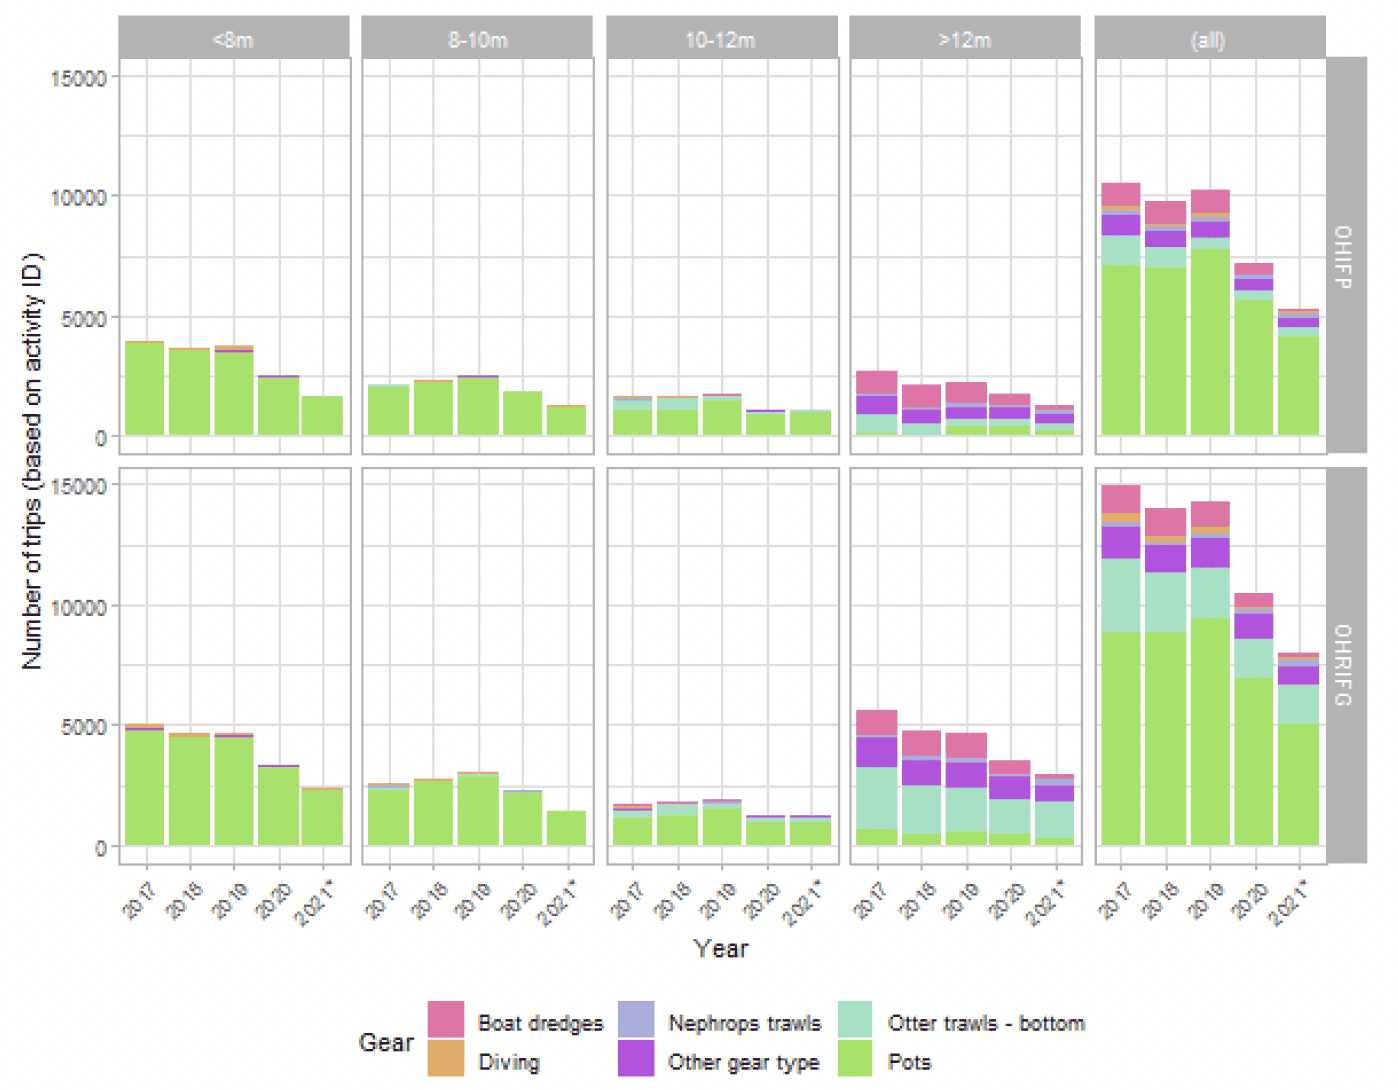 A series of bar graphs showing number of fishing trips made by vessels in different length categories and using different gears within the OHRIFG area and pilot area, from 2017 to 2021 (inclusive).